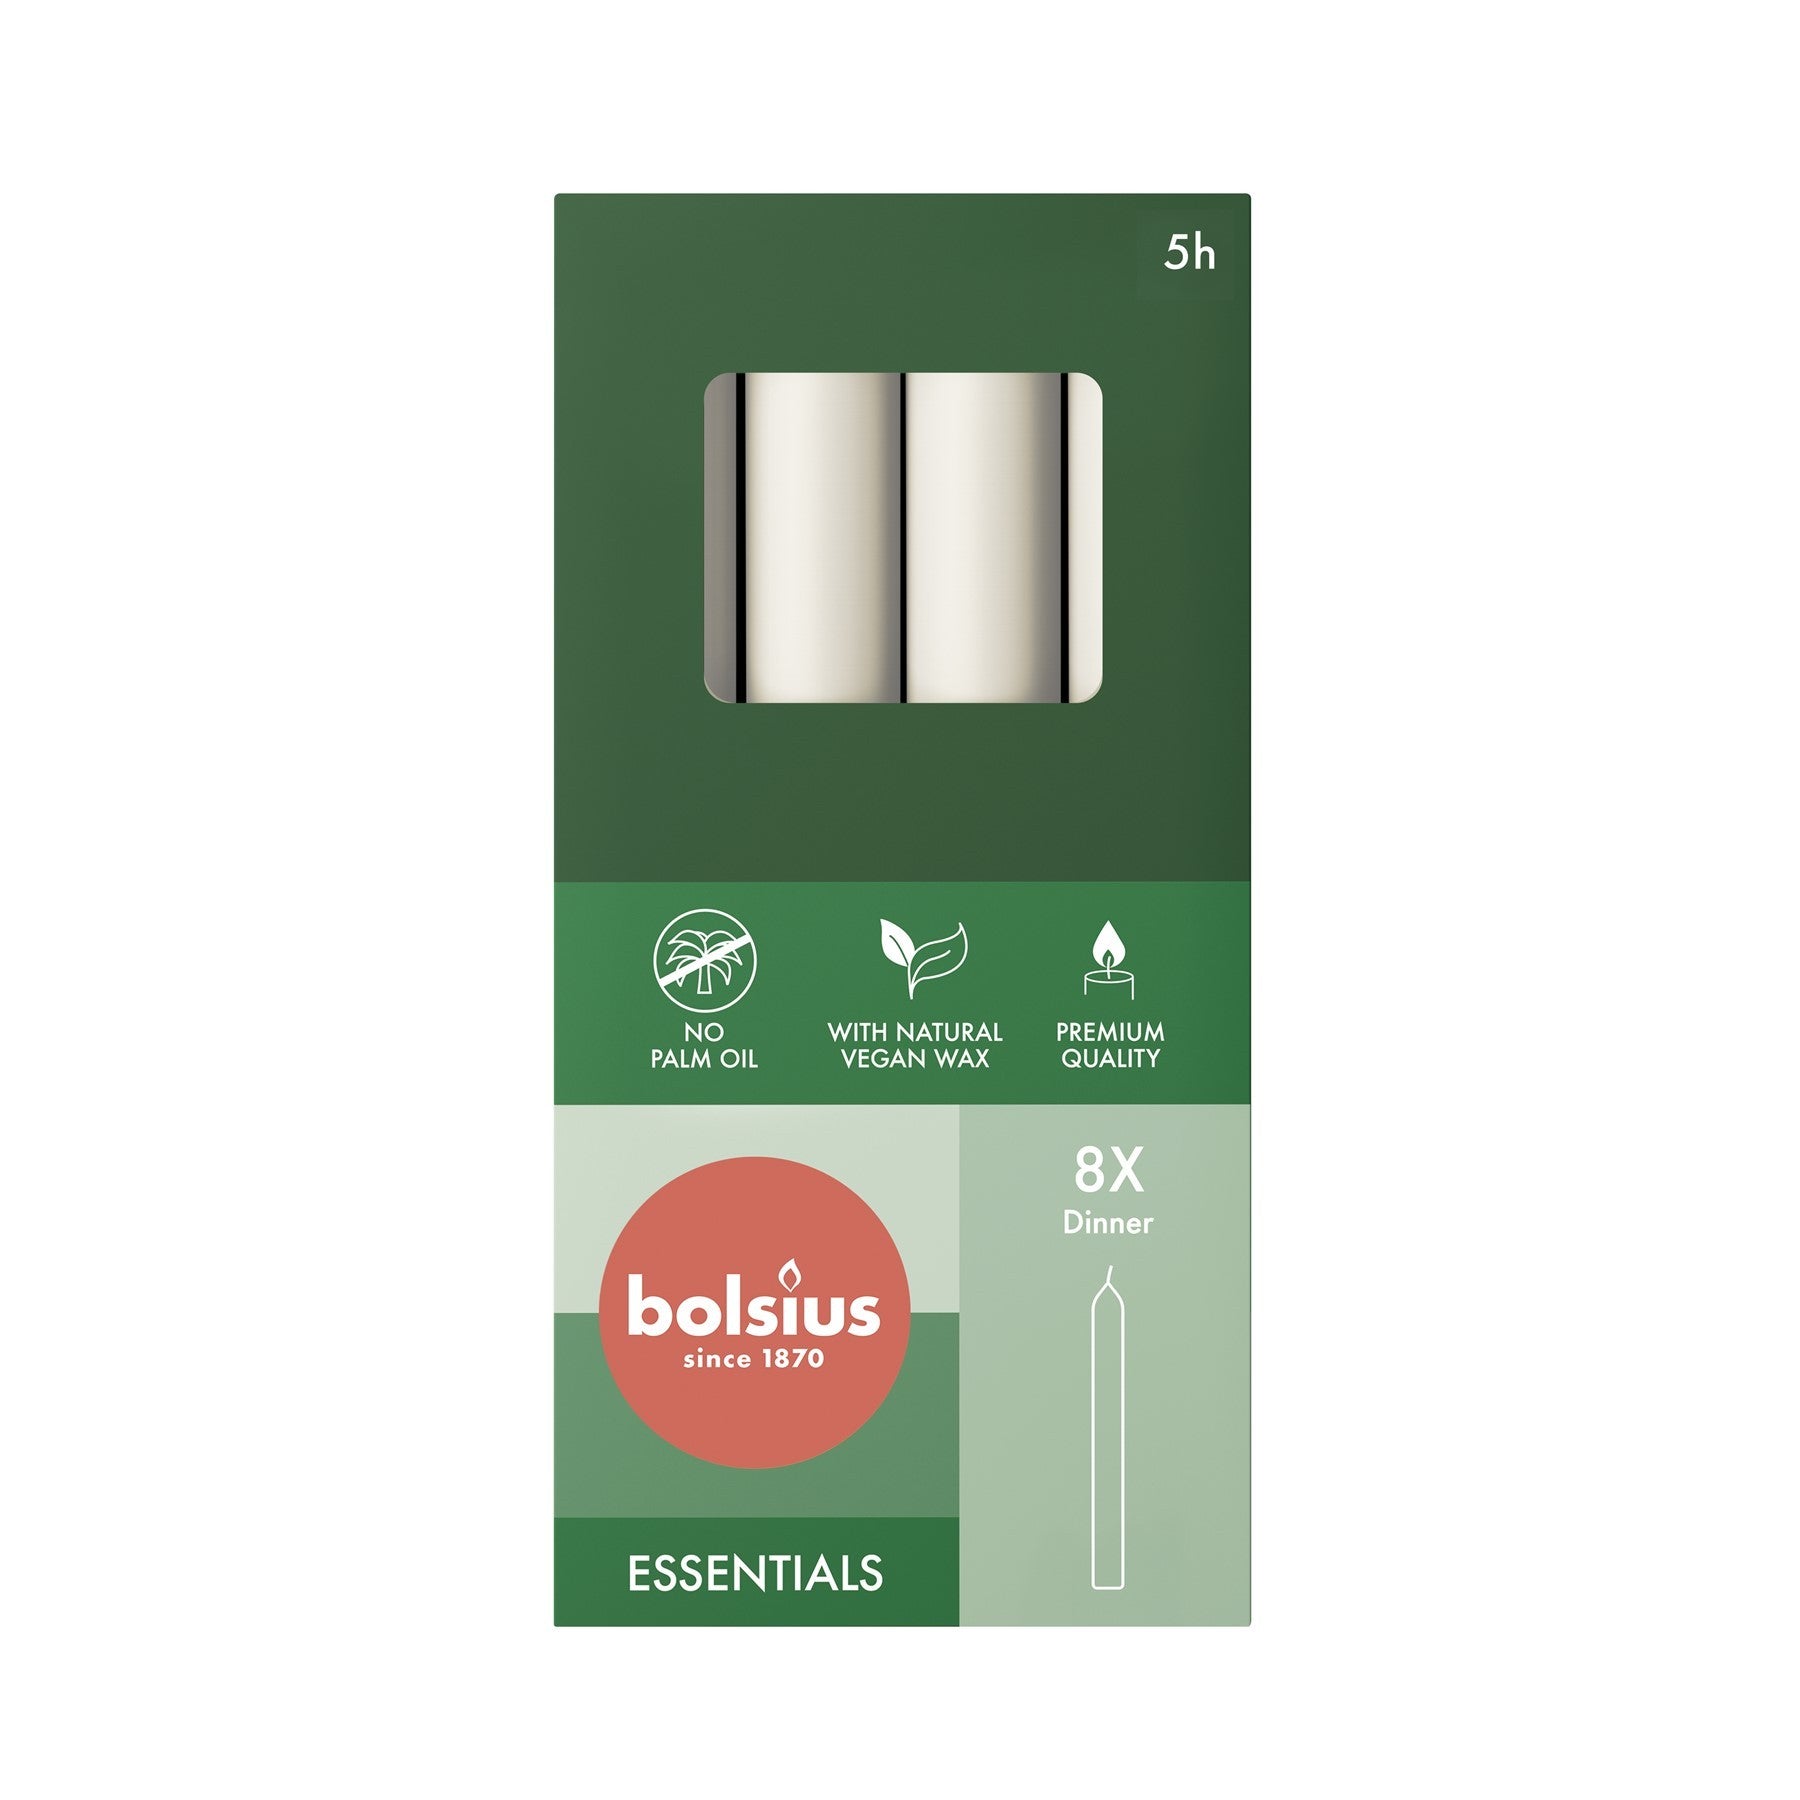 View Bolsius Cloudy White Box of 8 Dinner Candles 170mm x 20mm information